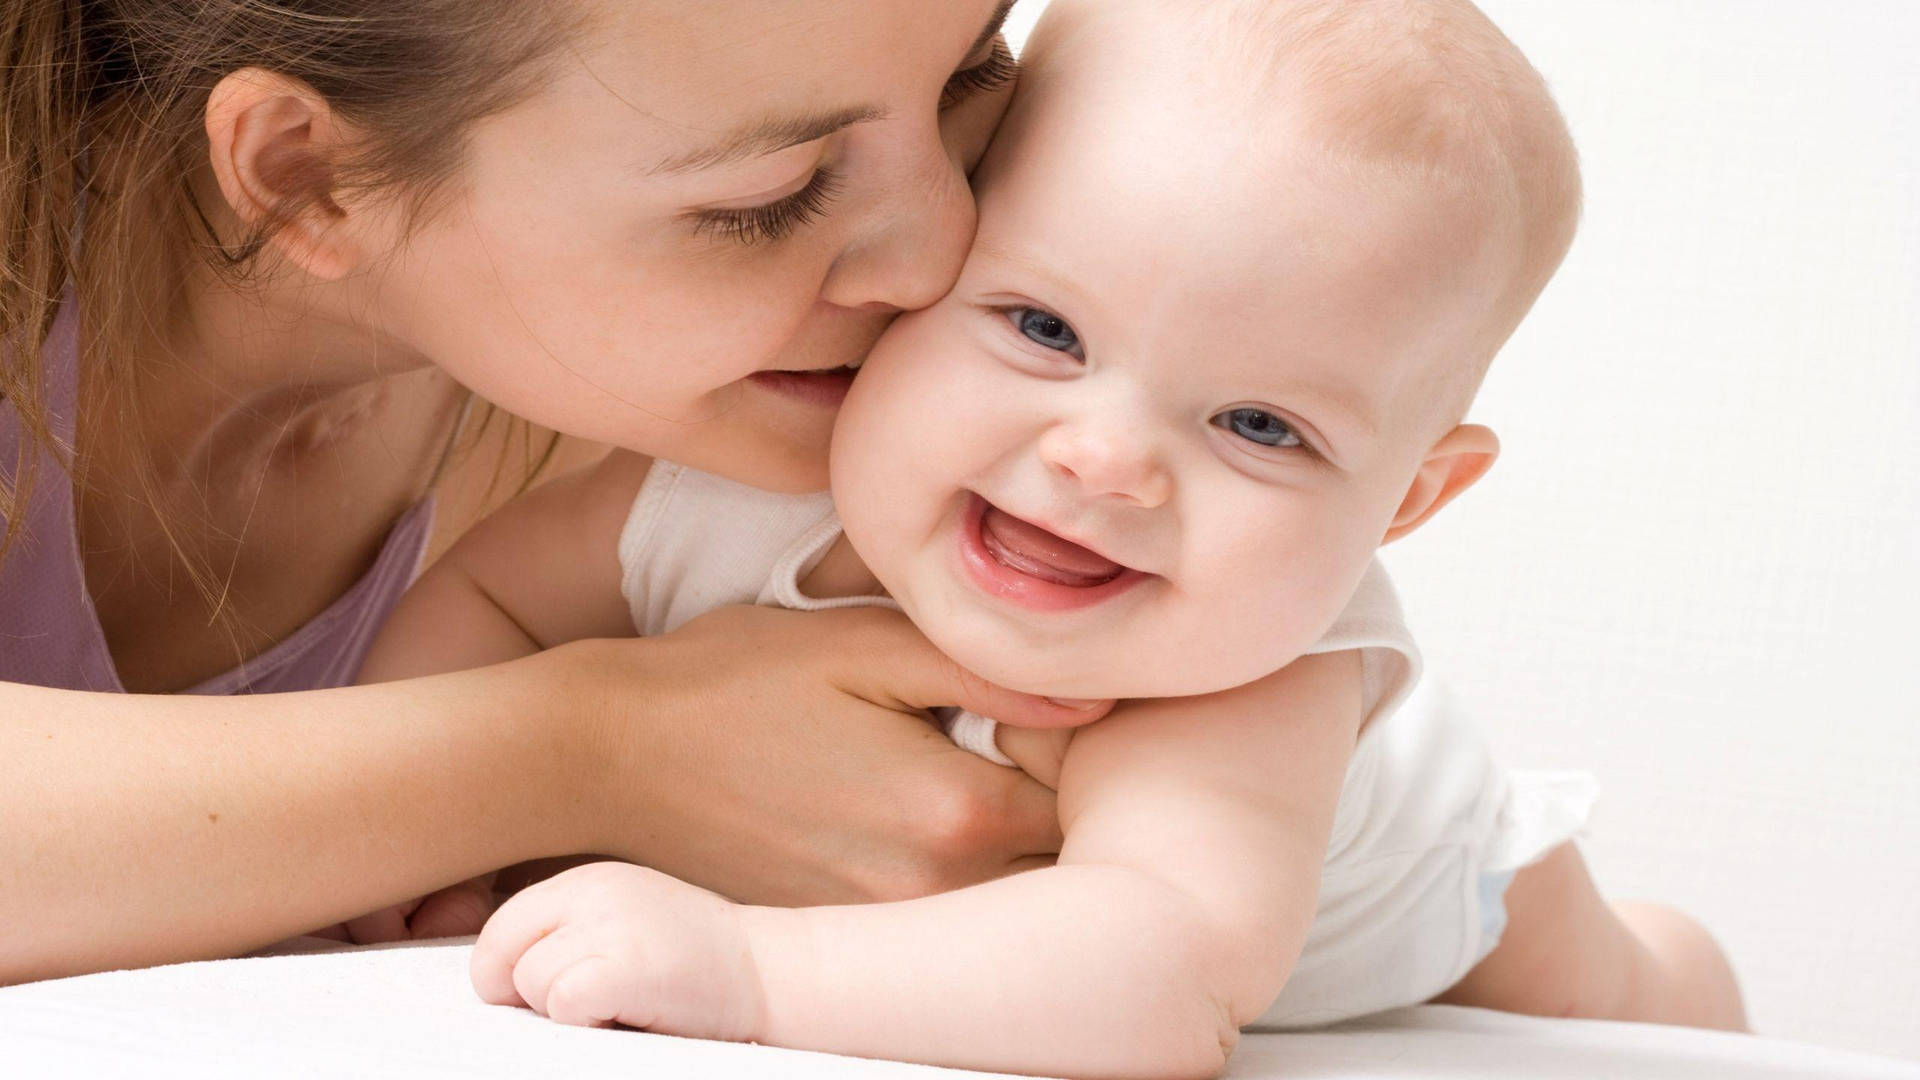 A Tender Moment Between Mother And Child Wallpaper